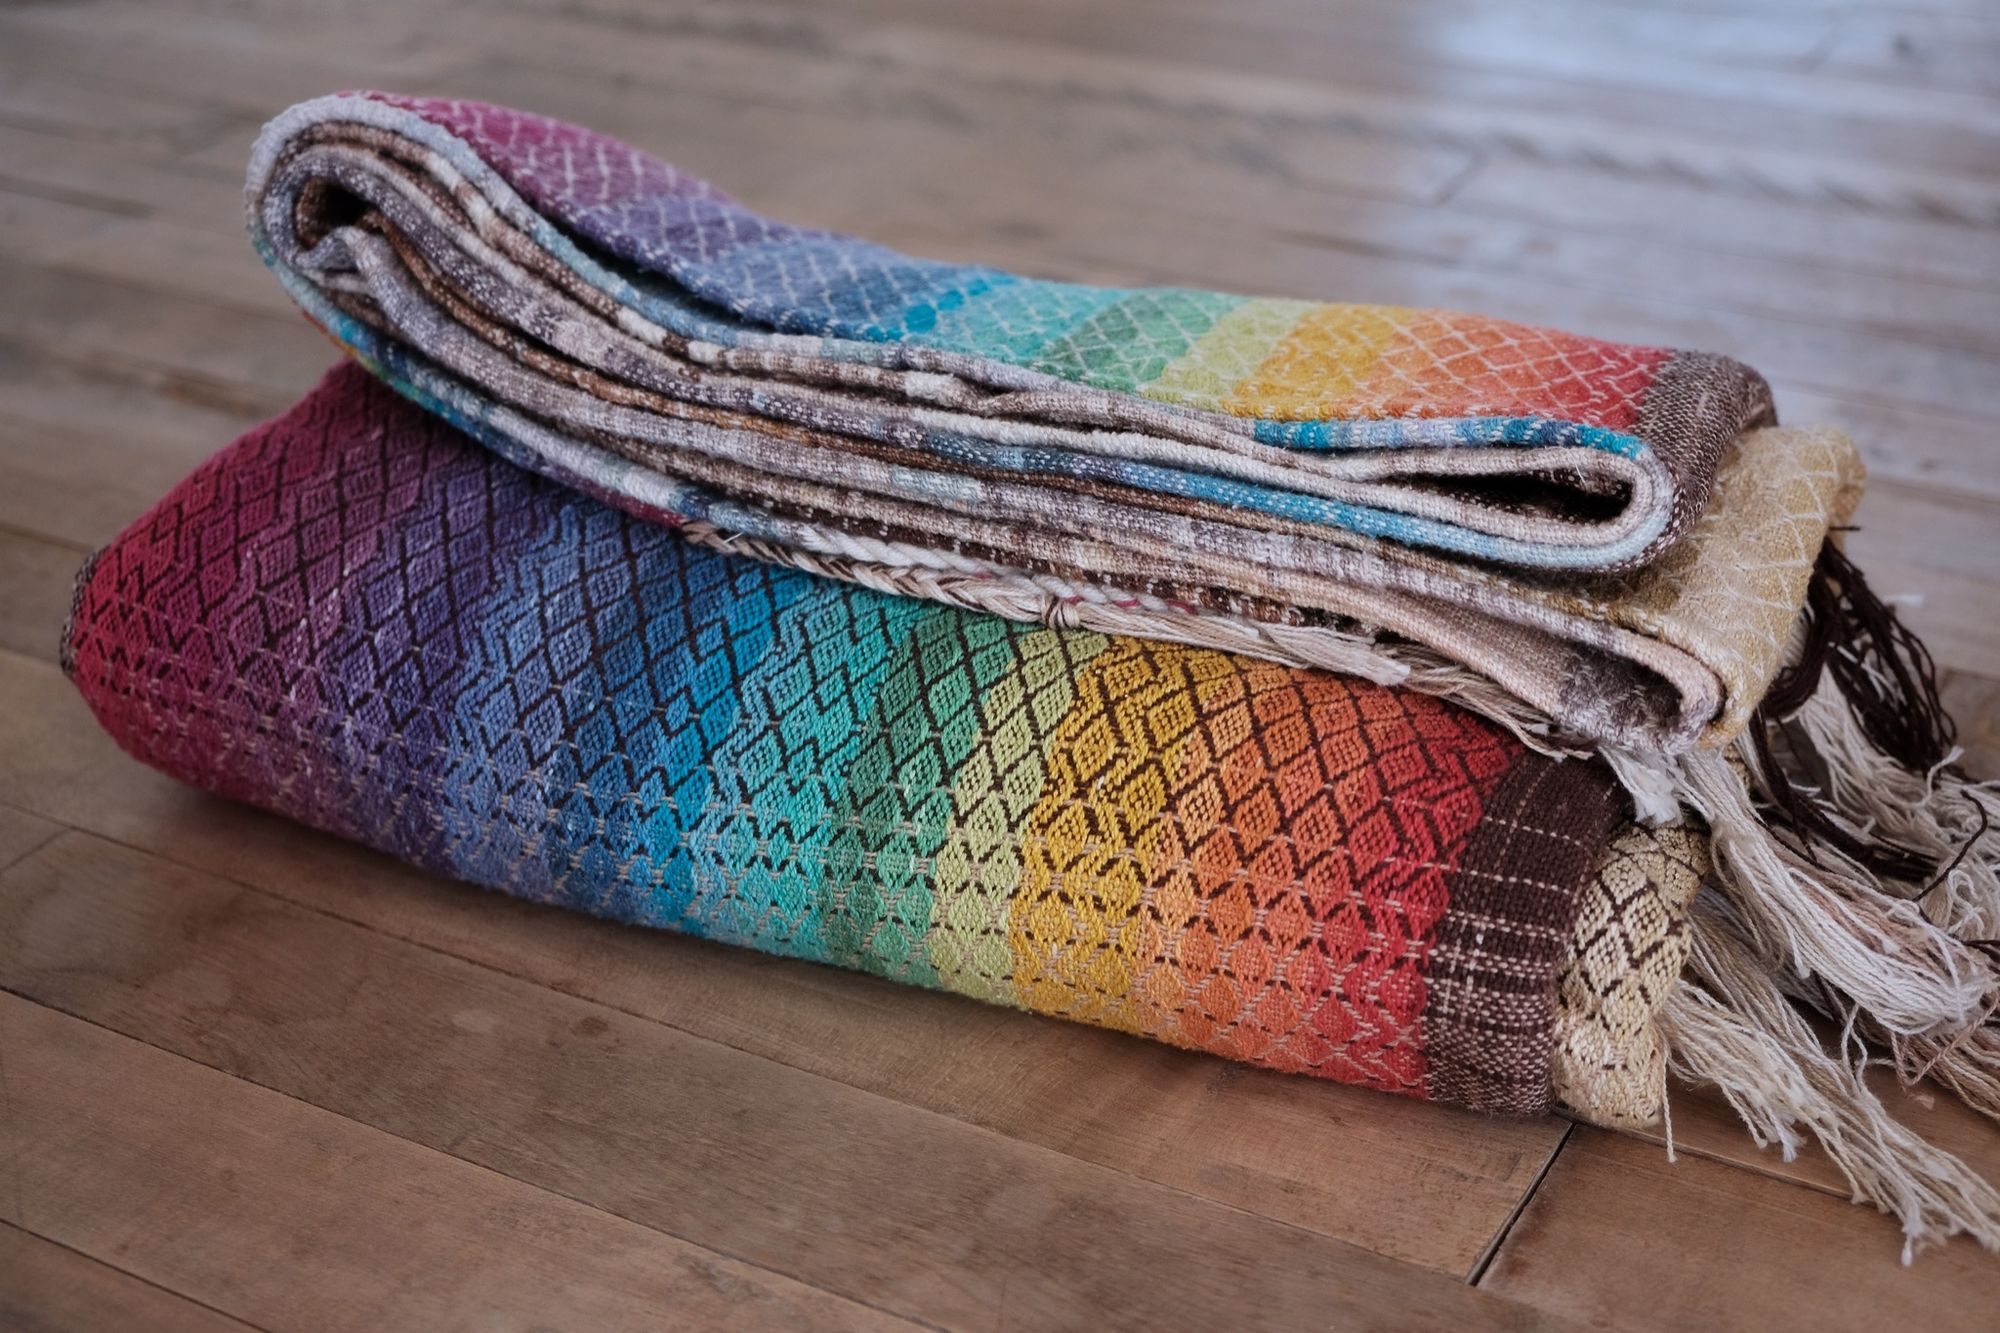 Handwoven fabric with a diamond pattern in brown, cream, white and rainbow colors folded on a wood floor